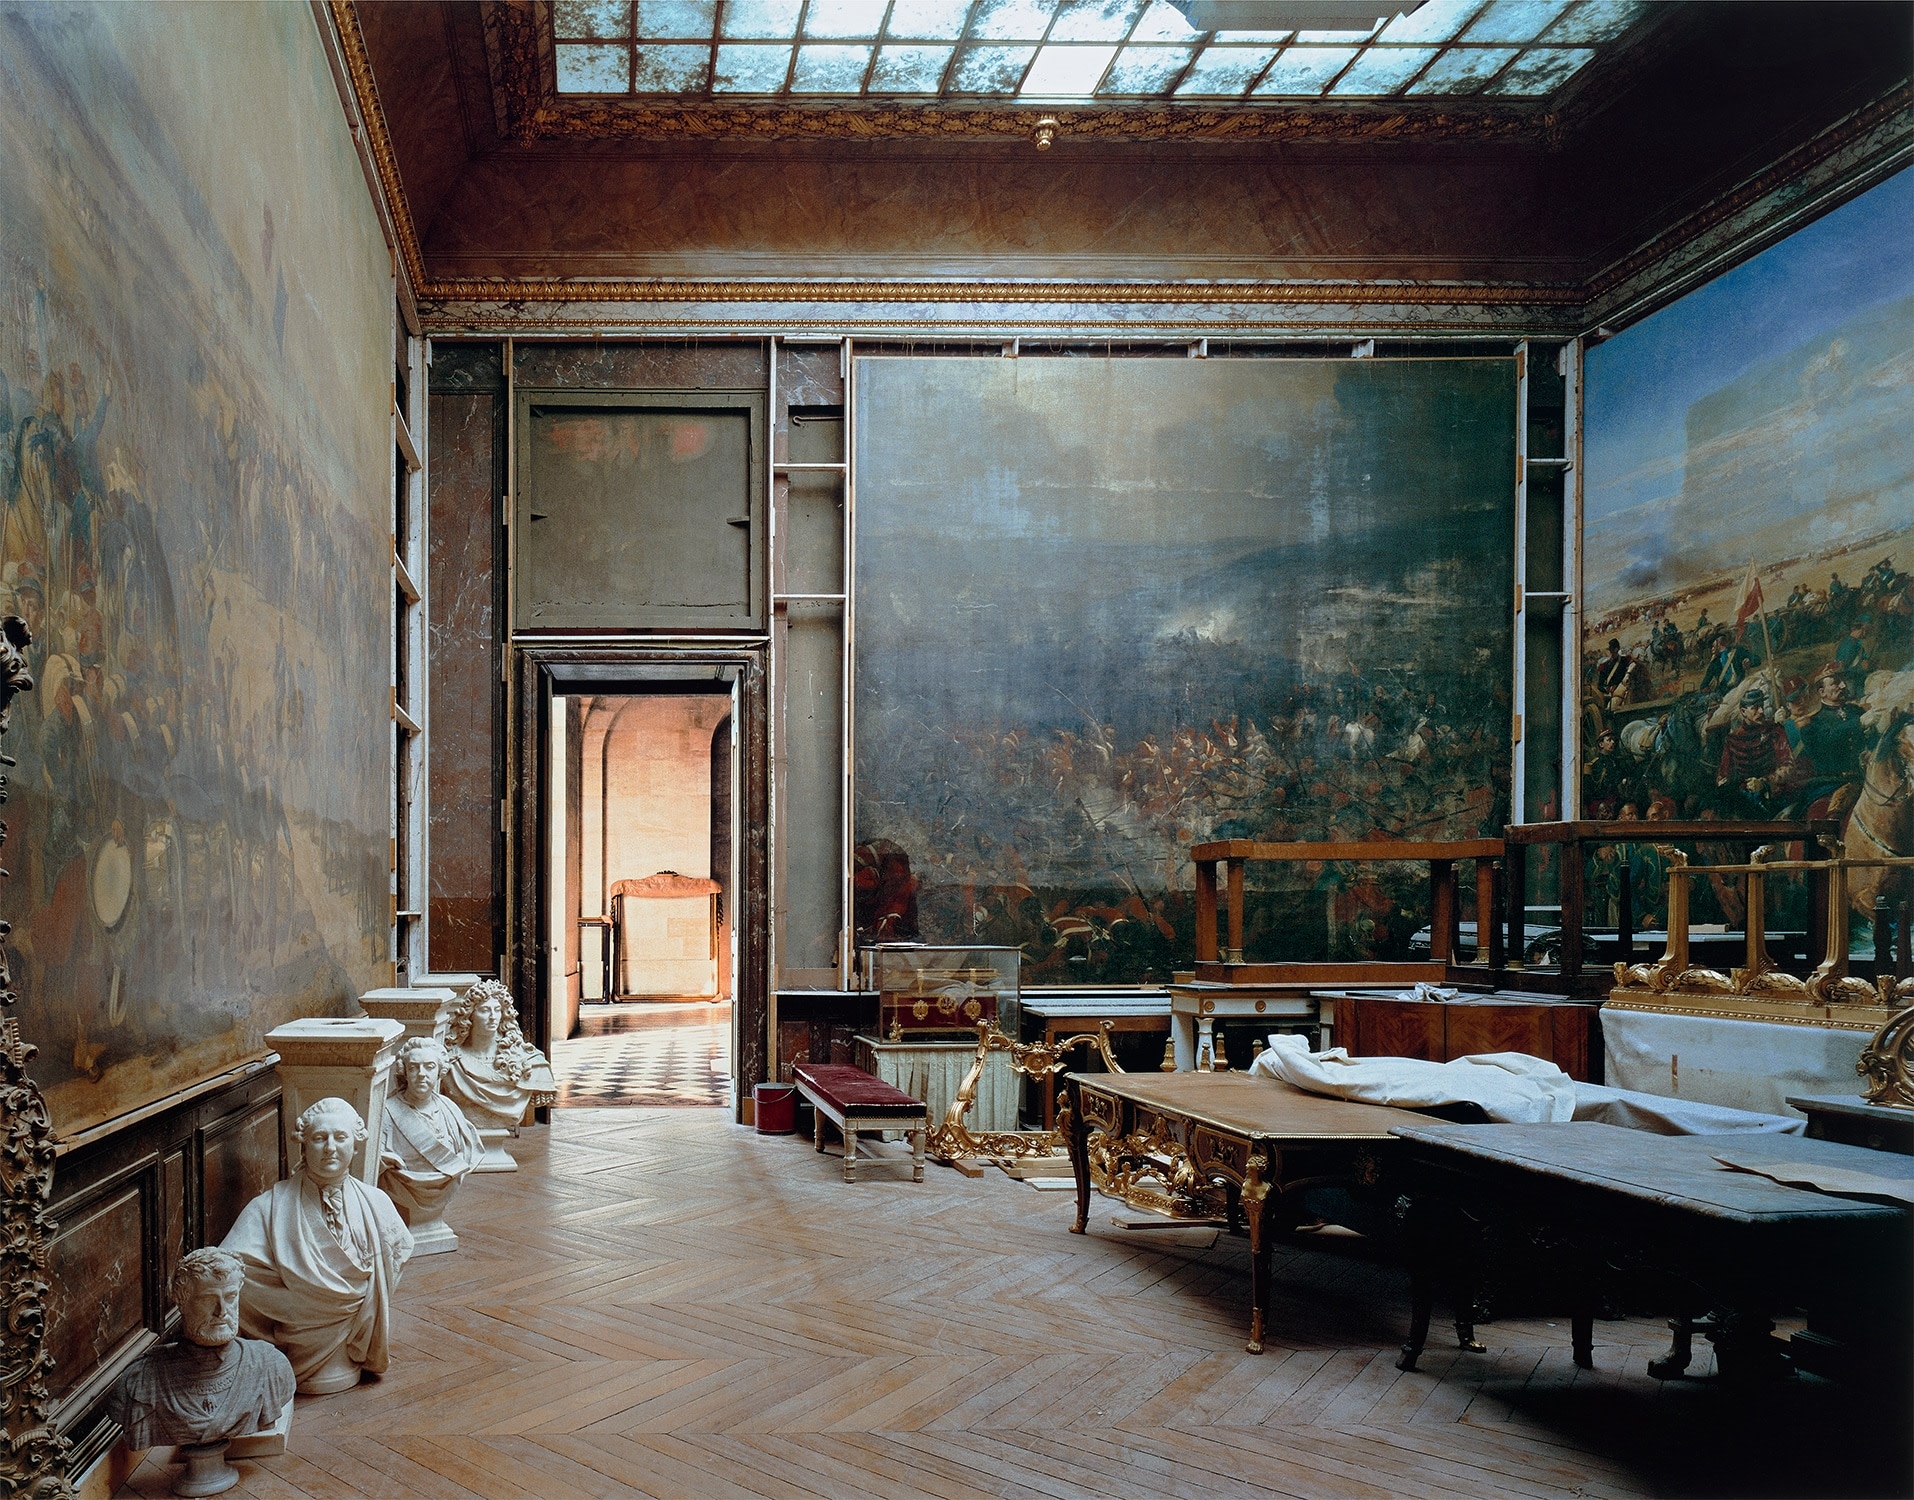 Artwork by Robert Polidori, Salle de L’Afrique, No. 5, Chateau de Versailles, Made of Chromogenic print, printed later, mounted.